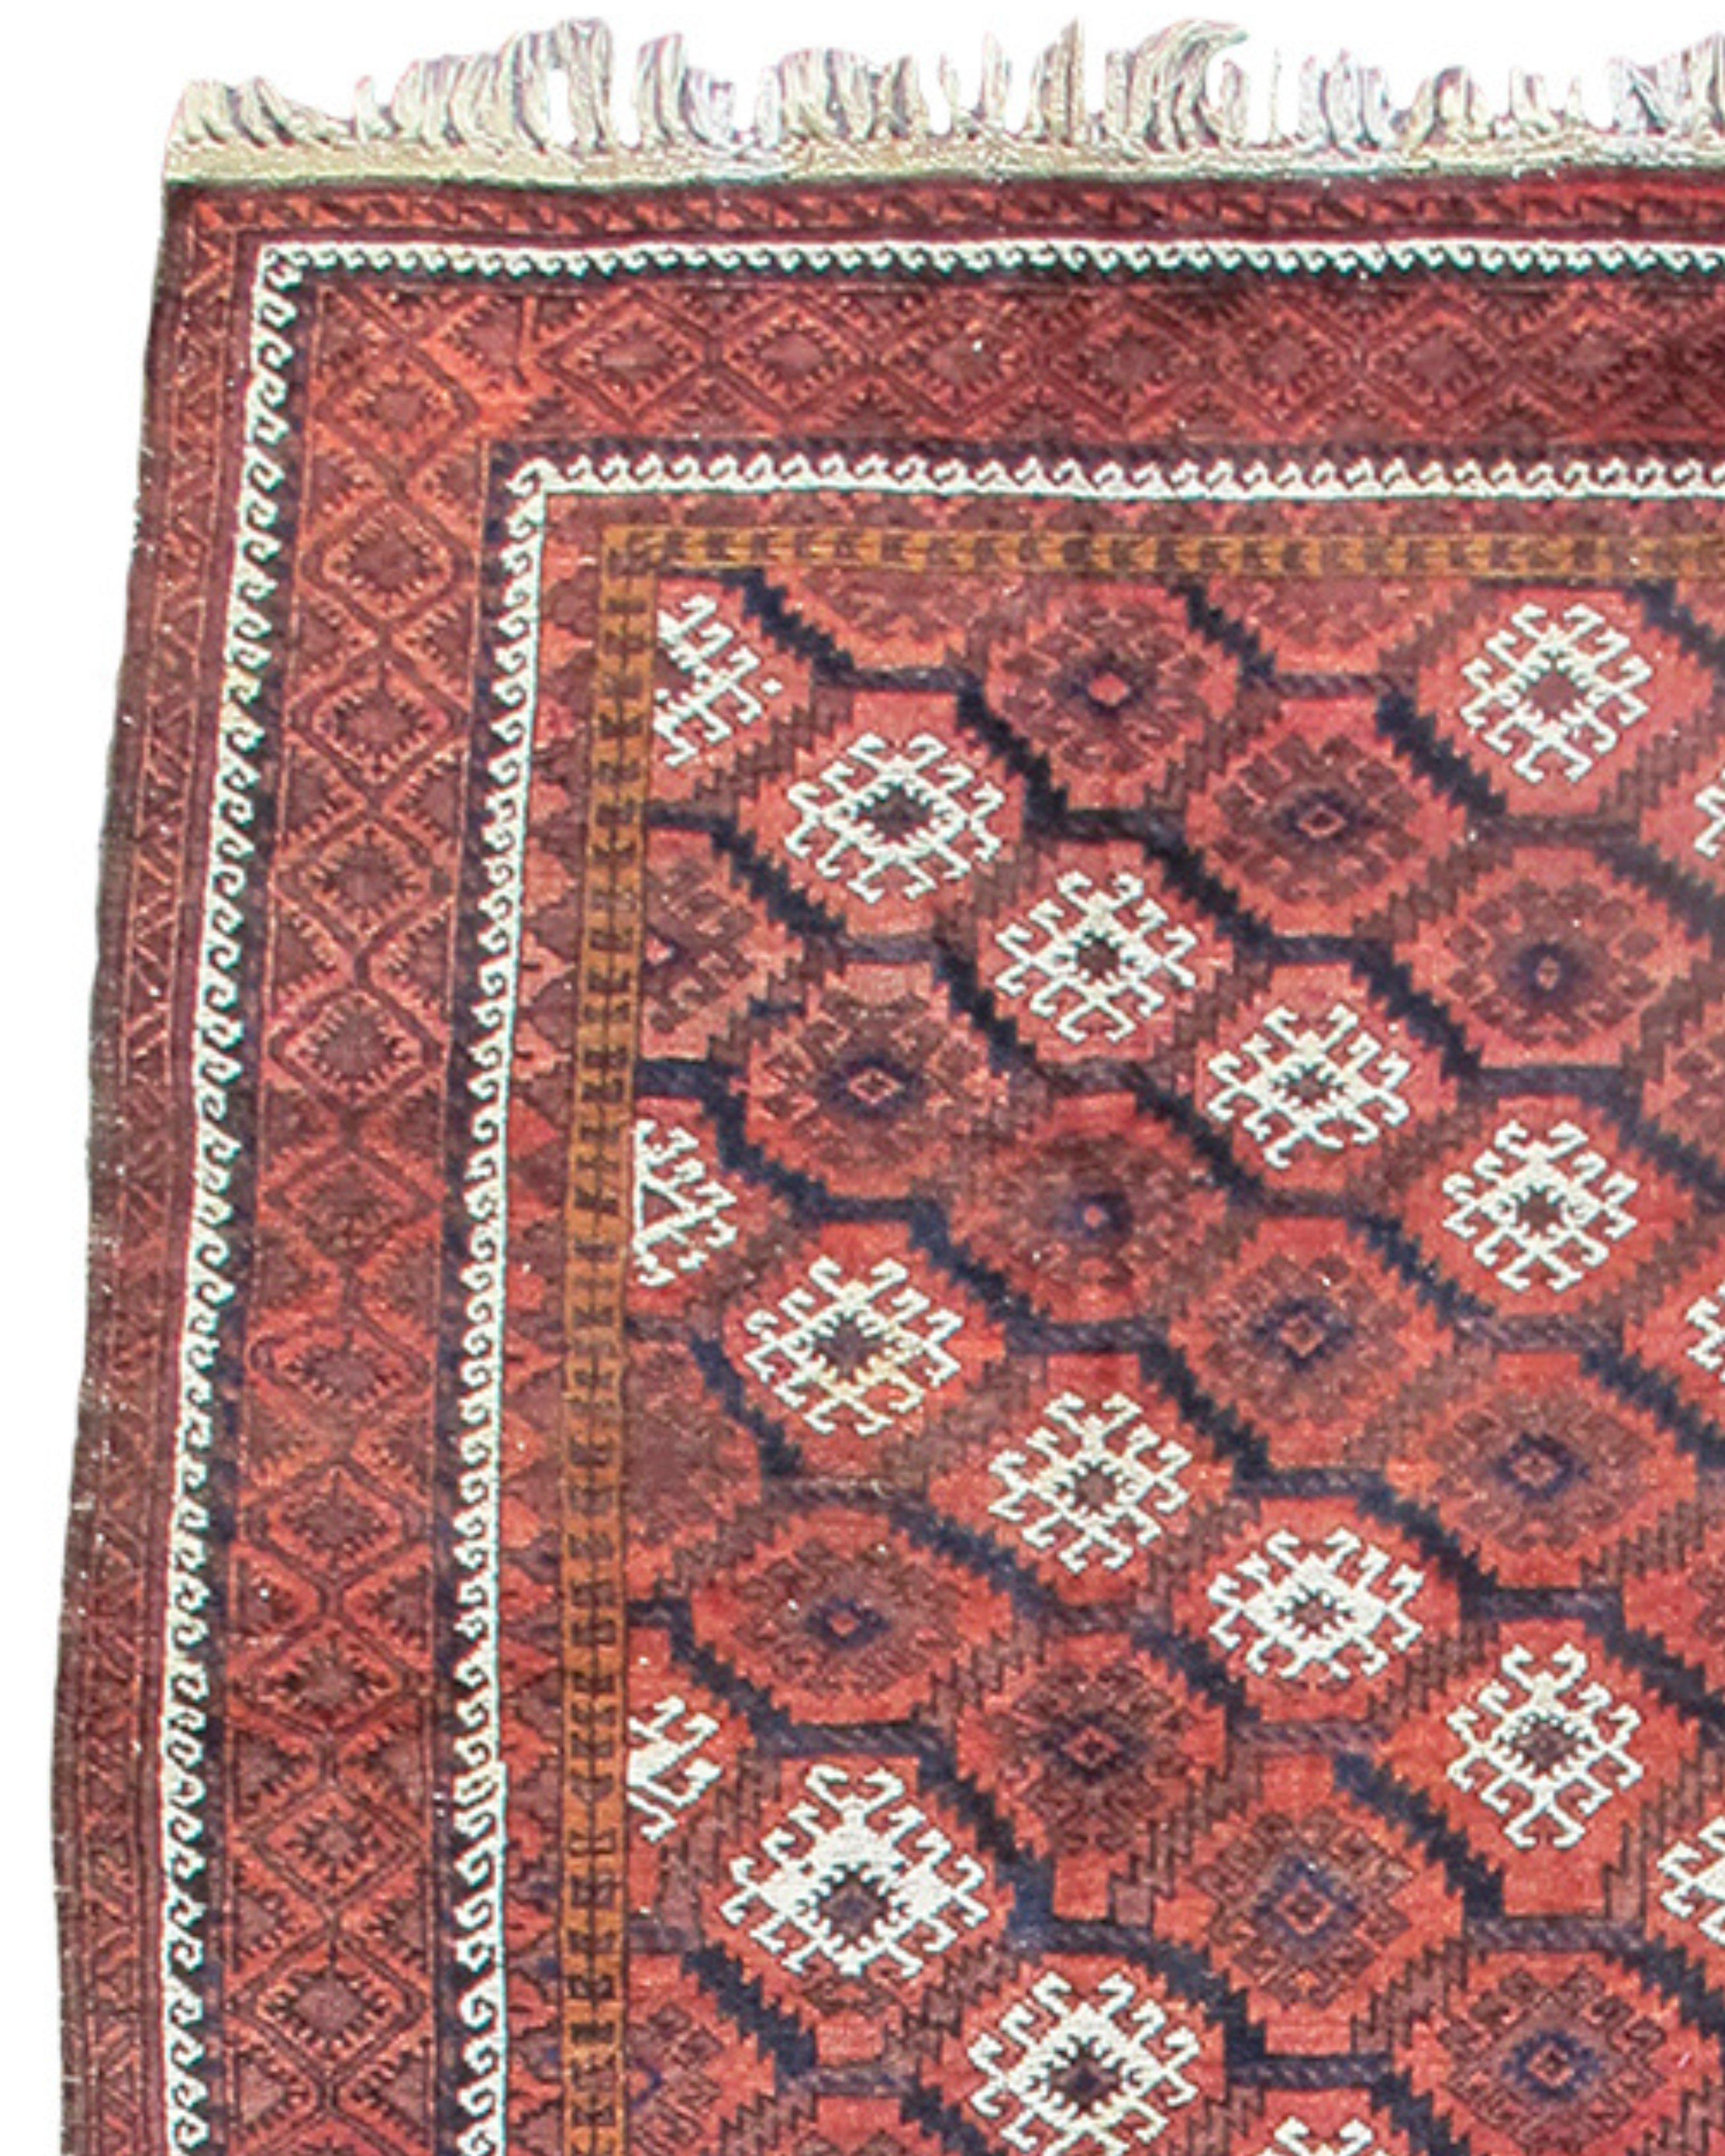 Hand-Woven Antique Afghan Baluch Rug, Early 20th Century For Sale